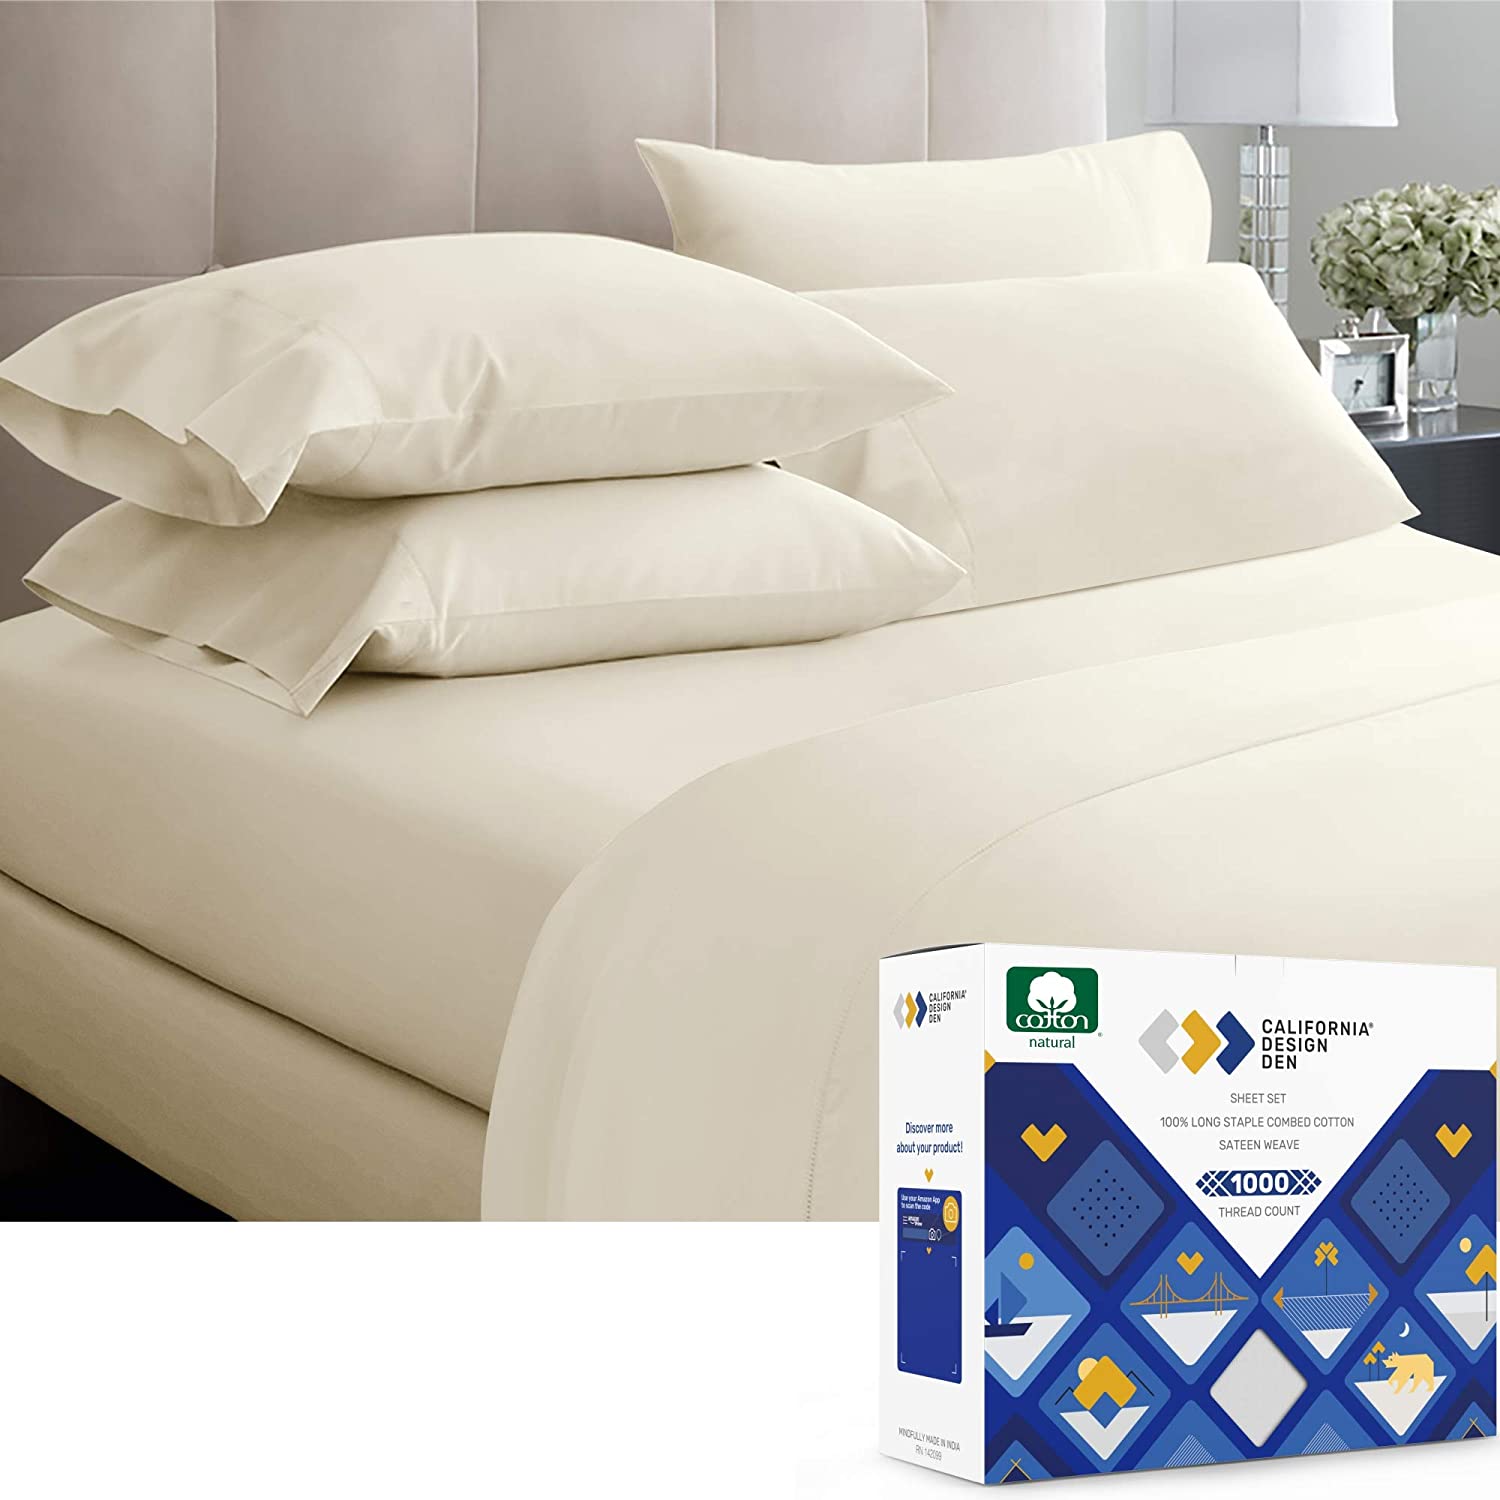 Luxury Sheets 1000 Thread Count 100% Cotton Sheets